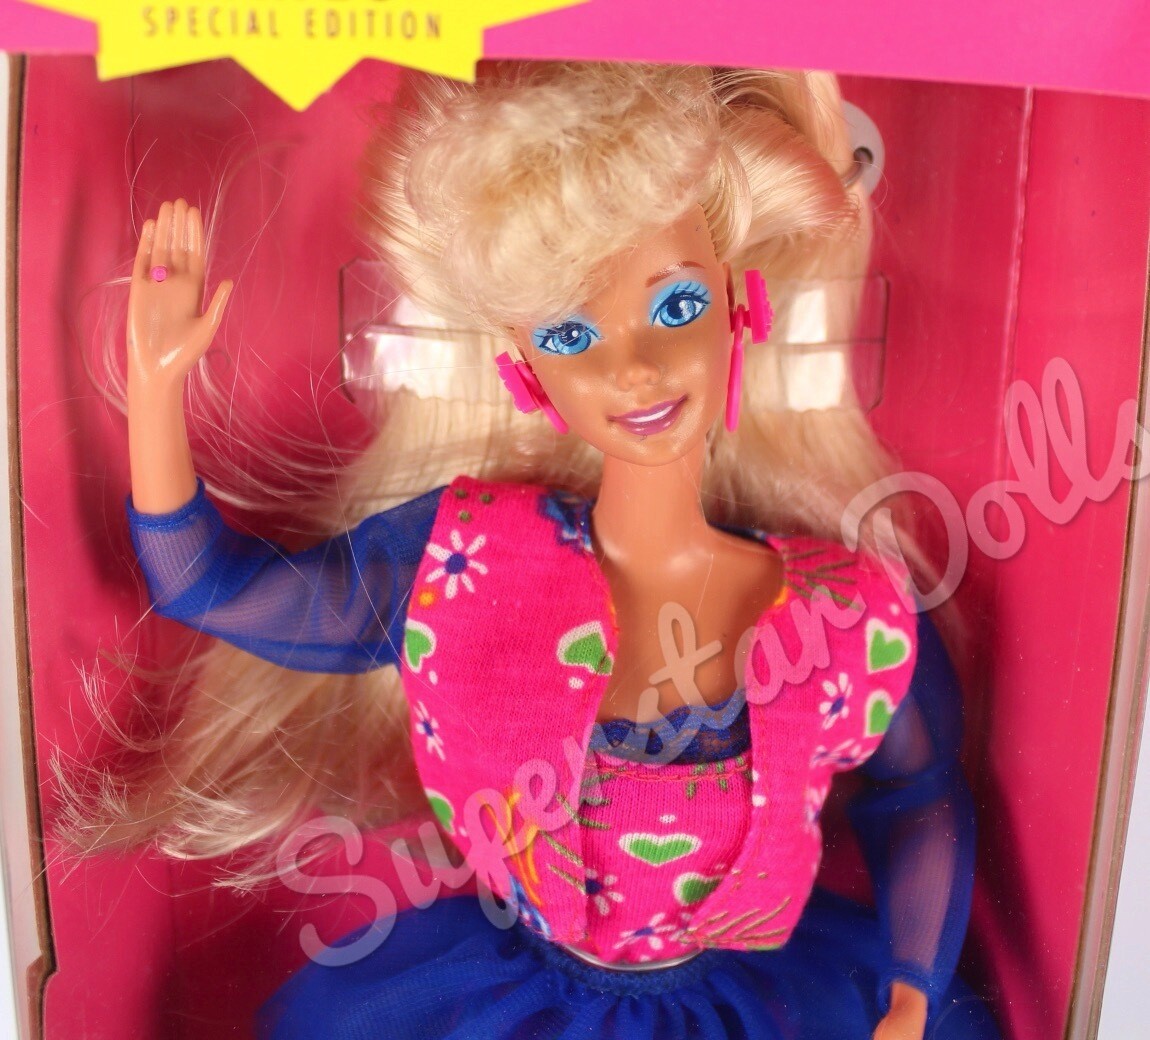 1991 Ames Special Edition: Hot Looks Barbie Doll